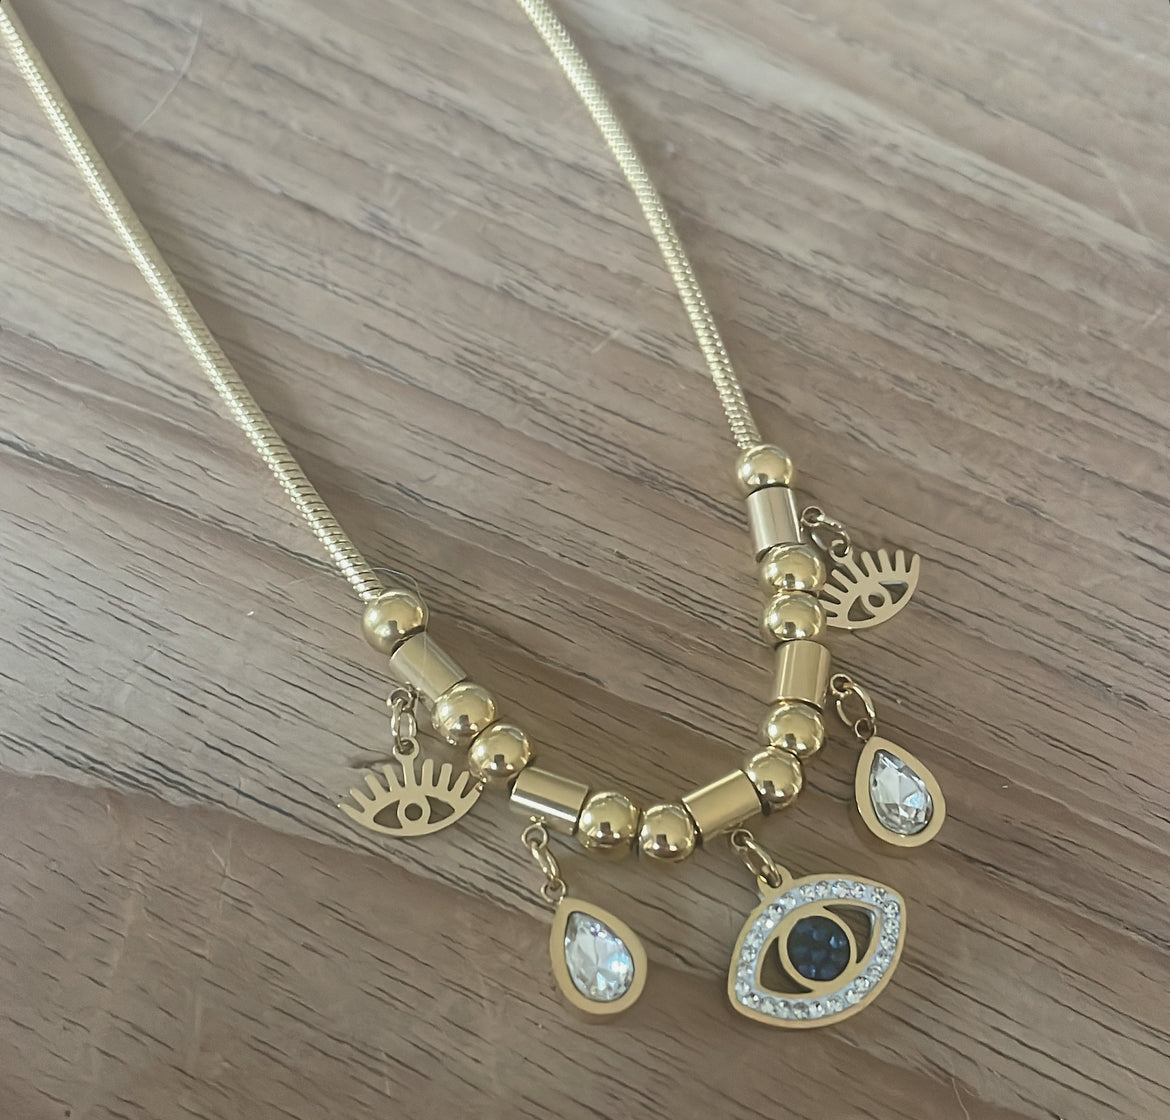 ‘LOOKING EYE’ necklace